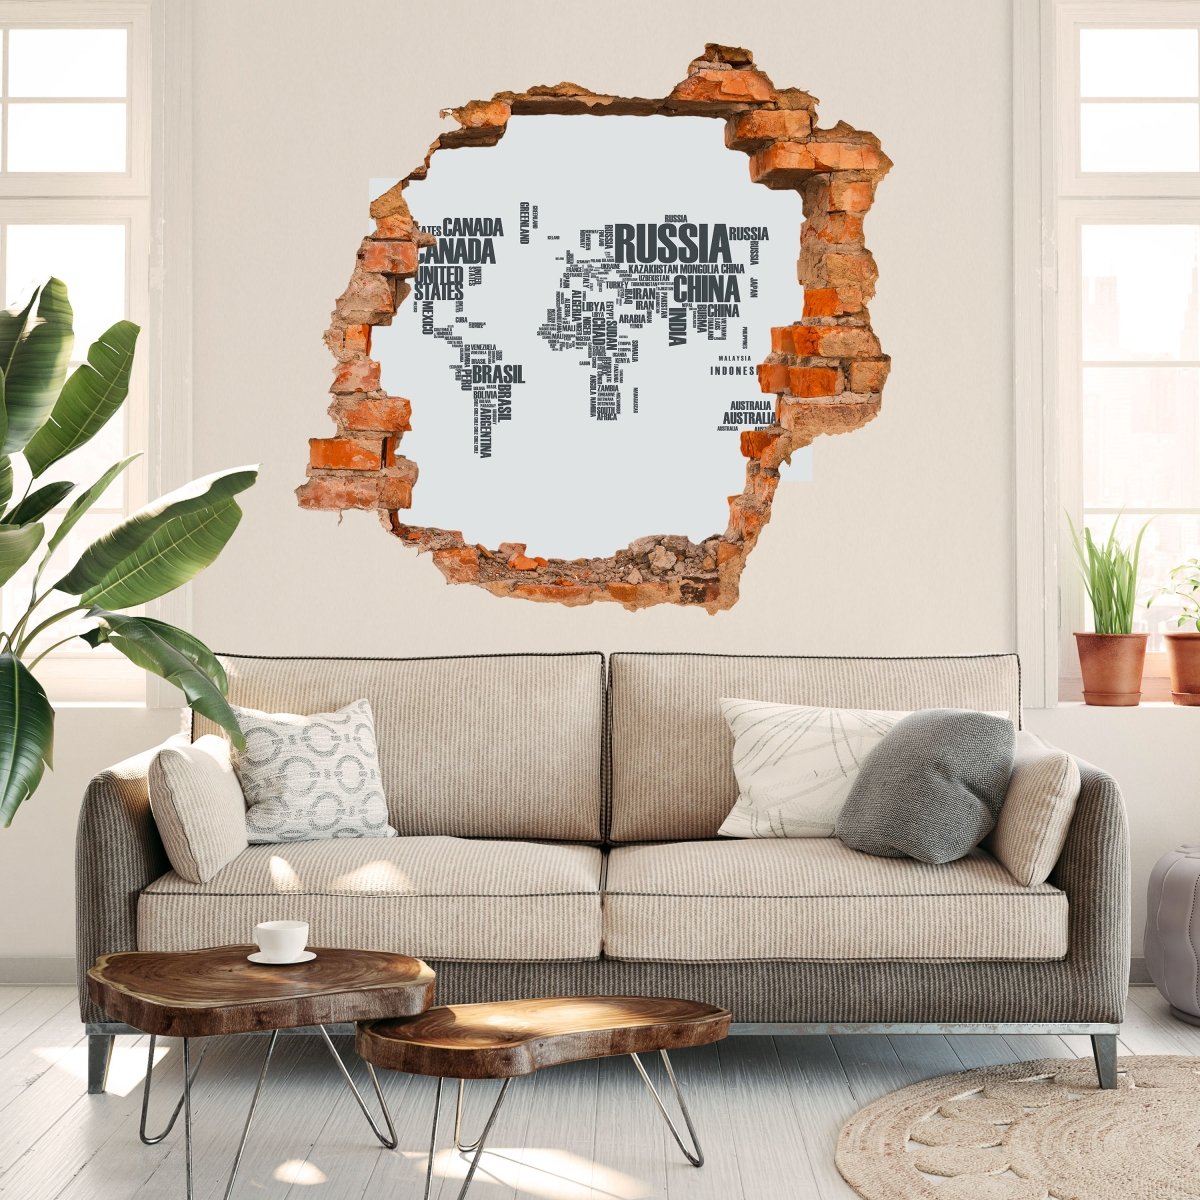 3D Wall Sticker World Map Country Names Earth - Wall Decal M0256